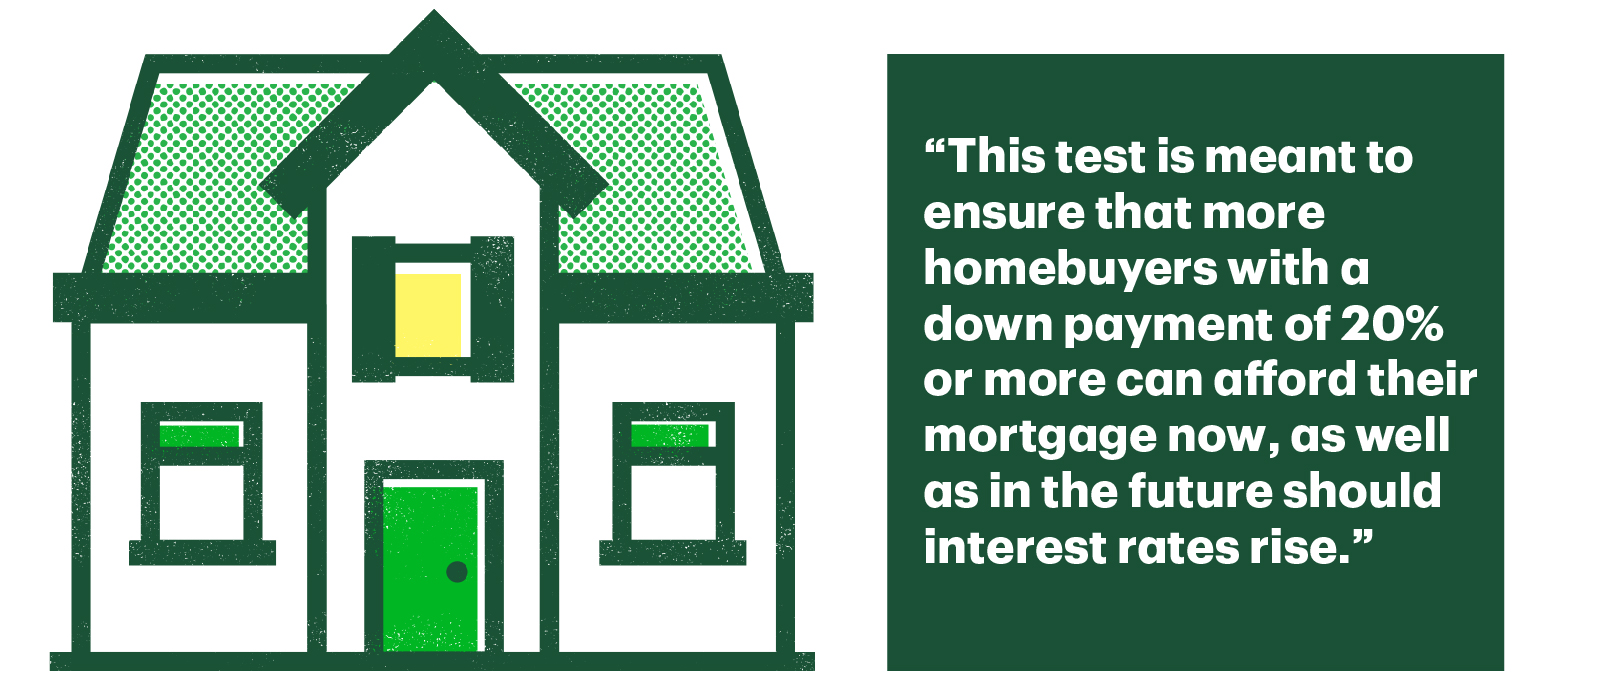 Graphic of house with text that says 'This test is meant to ensure that home-buyers with a down payment of 20% or more can afford their mortgage now, as well as in the future should interest rates rise.'